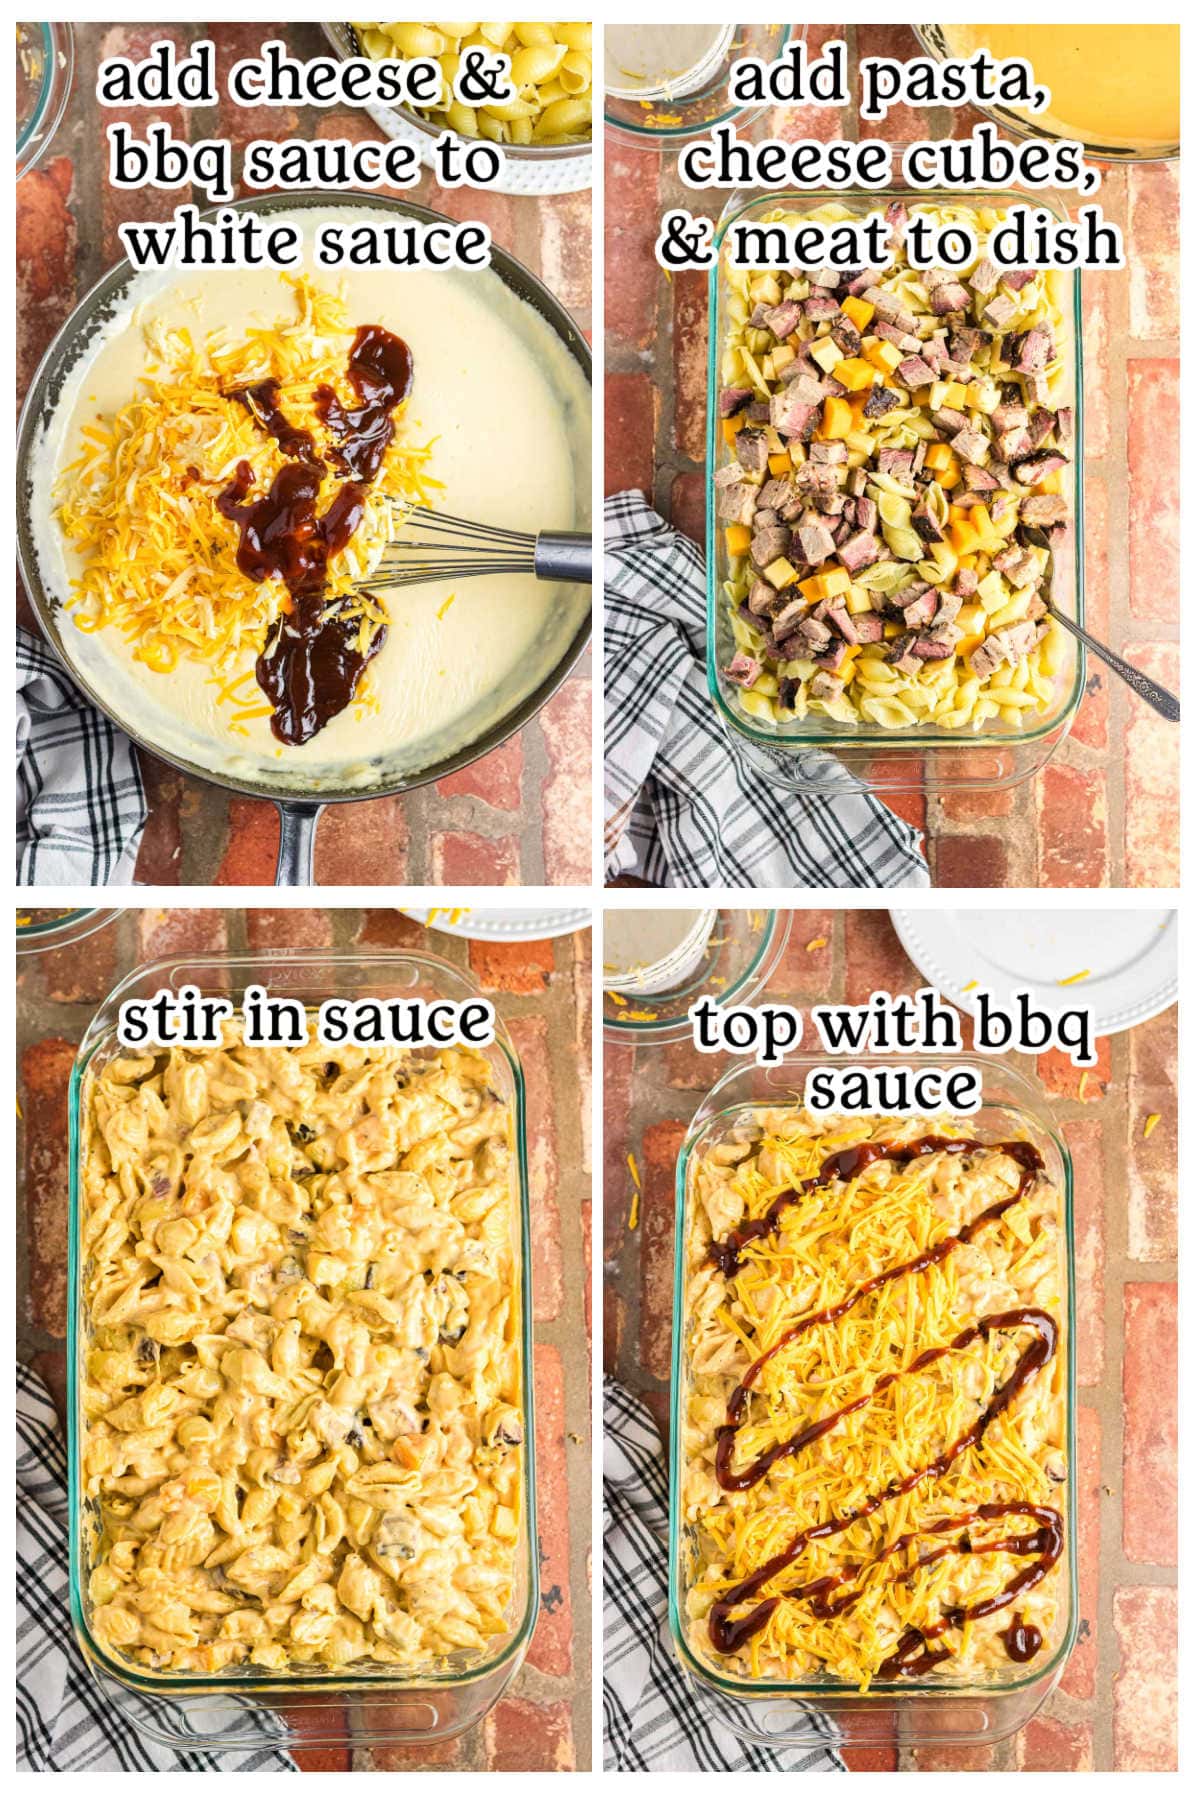 Four overhead images with text overlay depicting the main recipe steps.